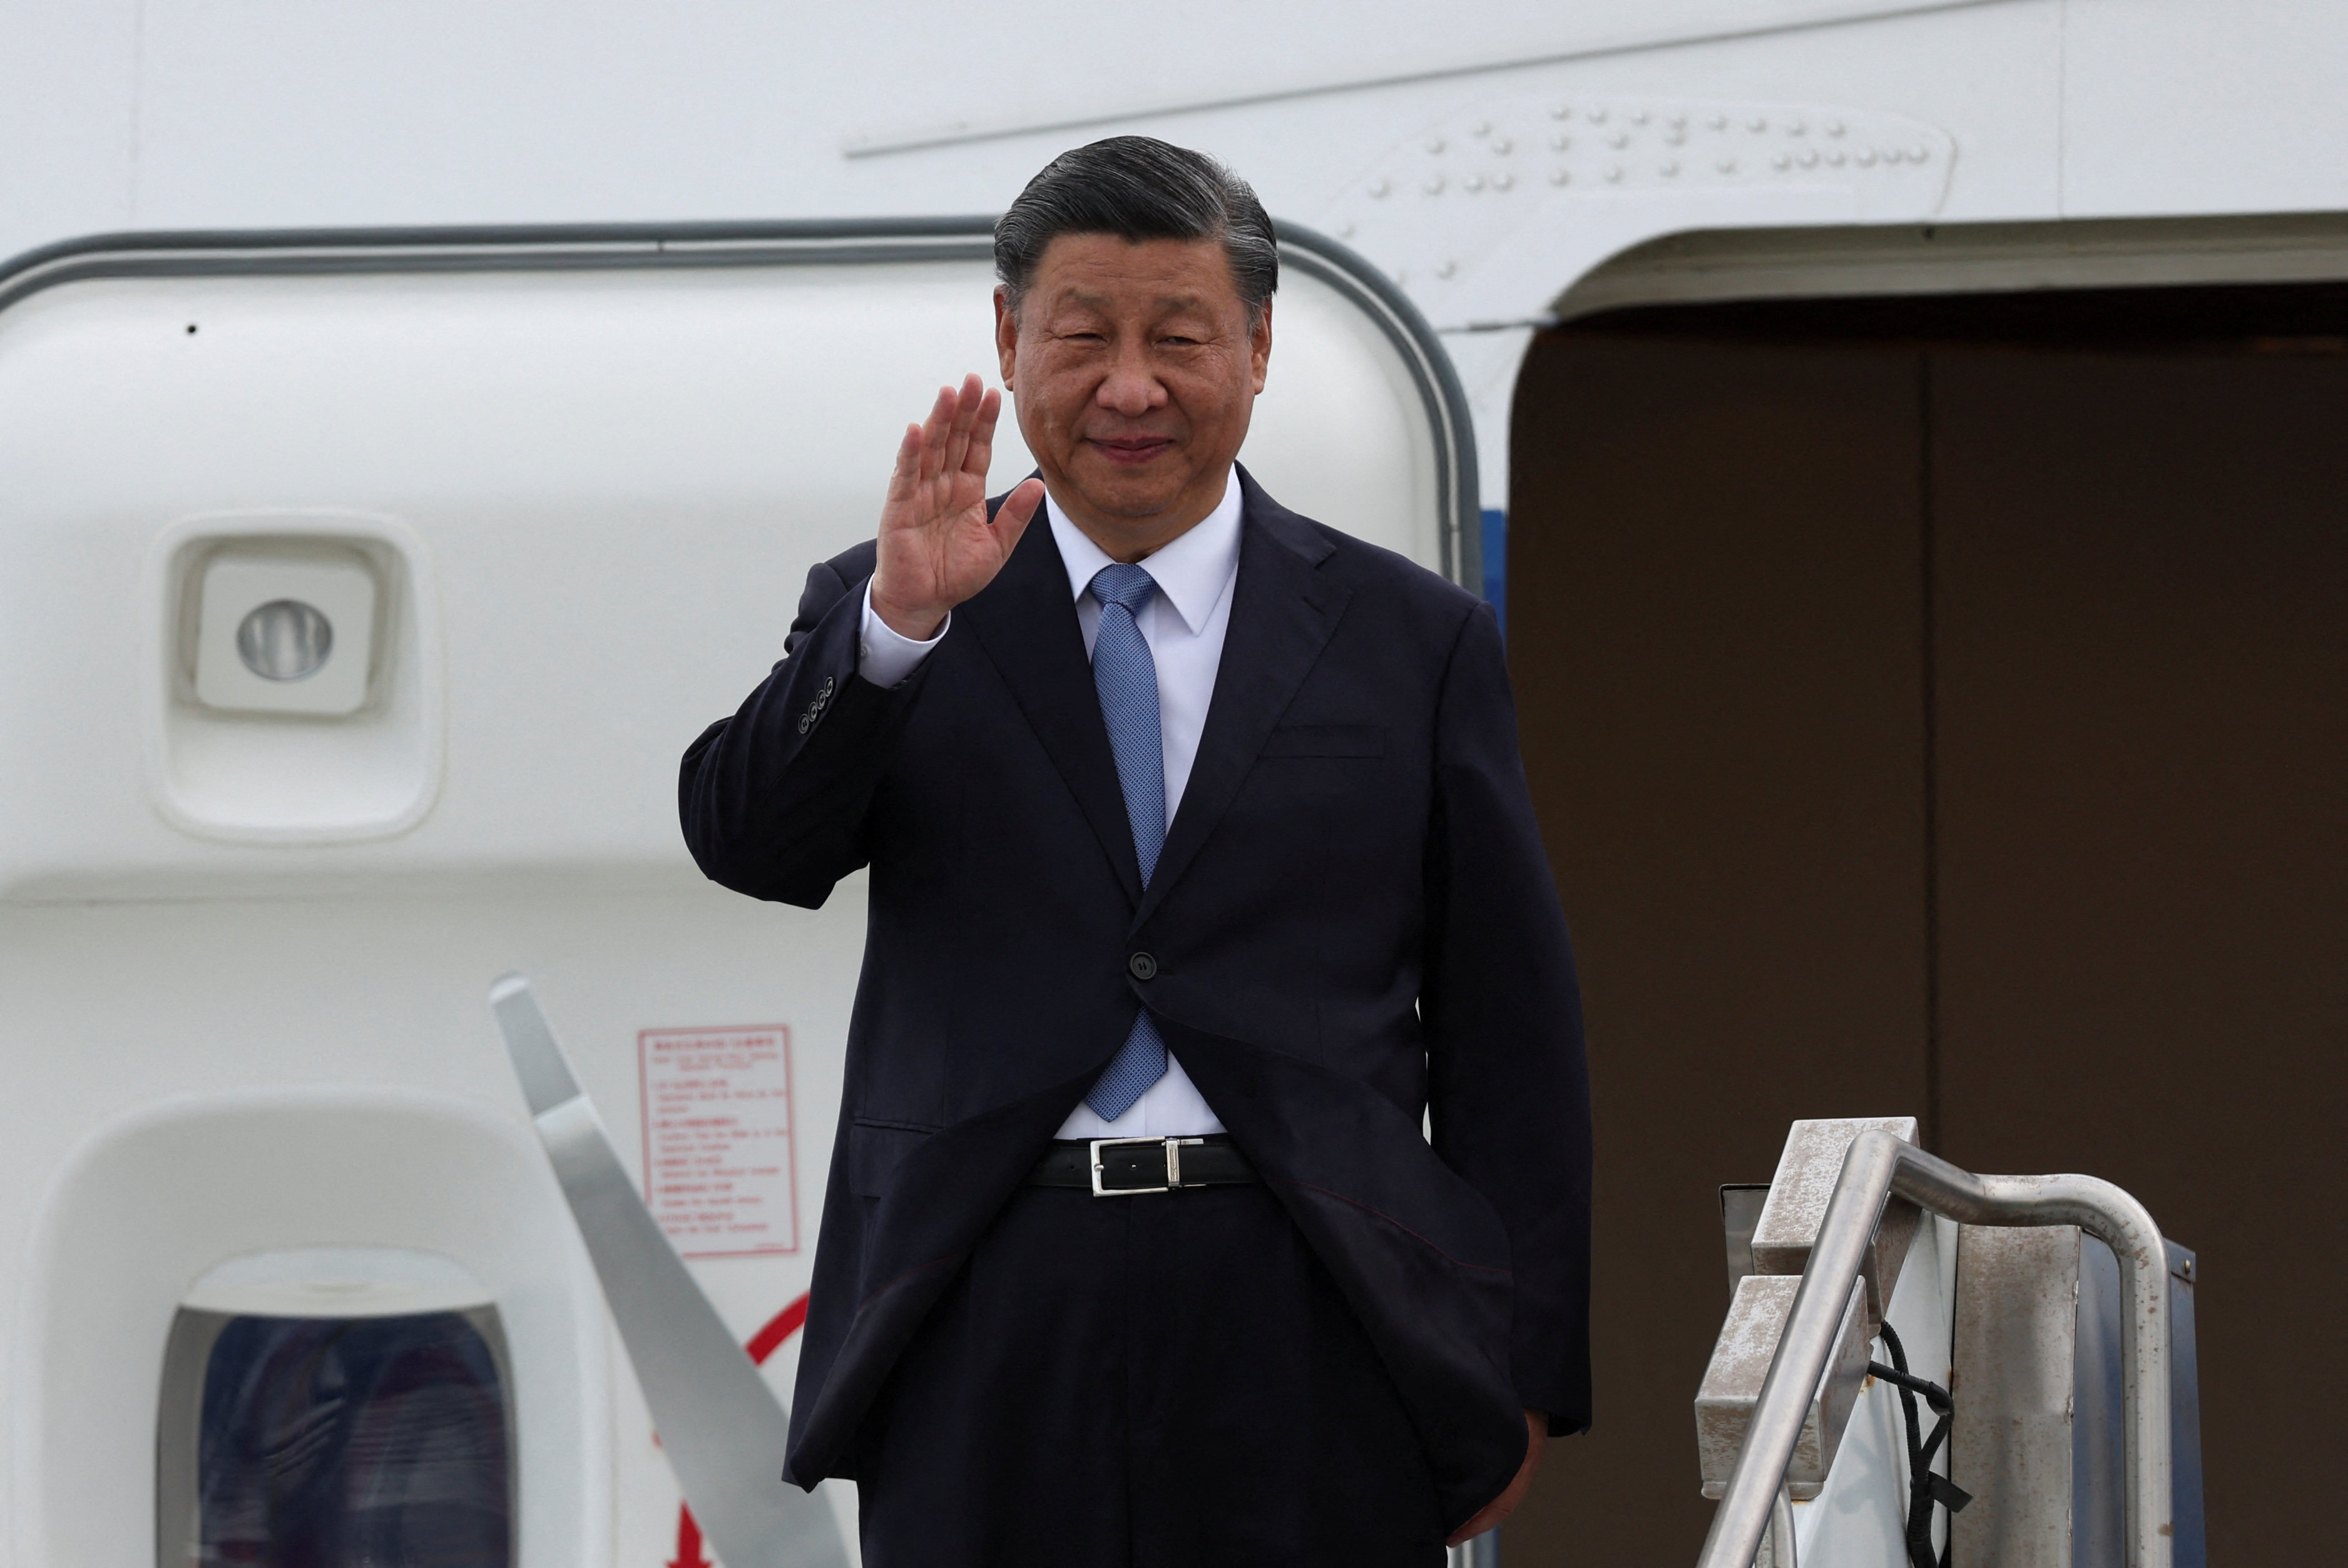 Chinese President Xi Jinping waves as he arrives at San Francisco International Airport on Tuesday. Xi is visiting the US to attend the Asia-Pacific Economic Cooperation summit. Photo: Reuters